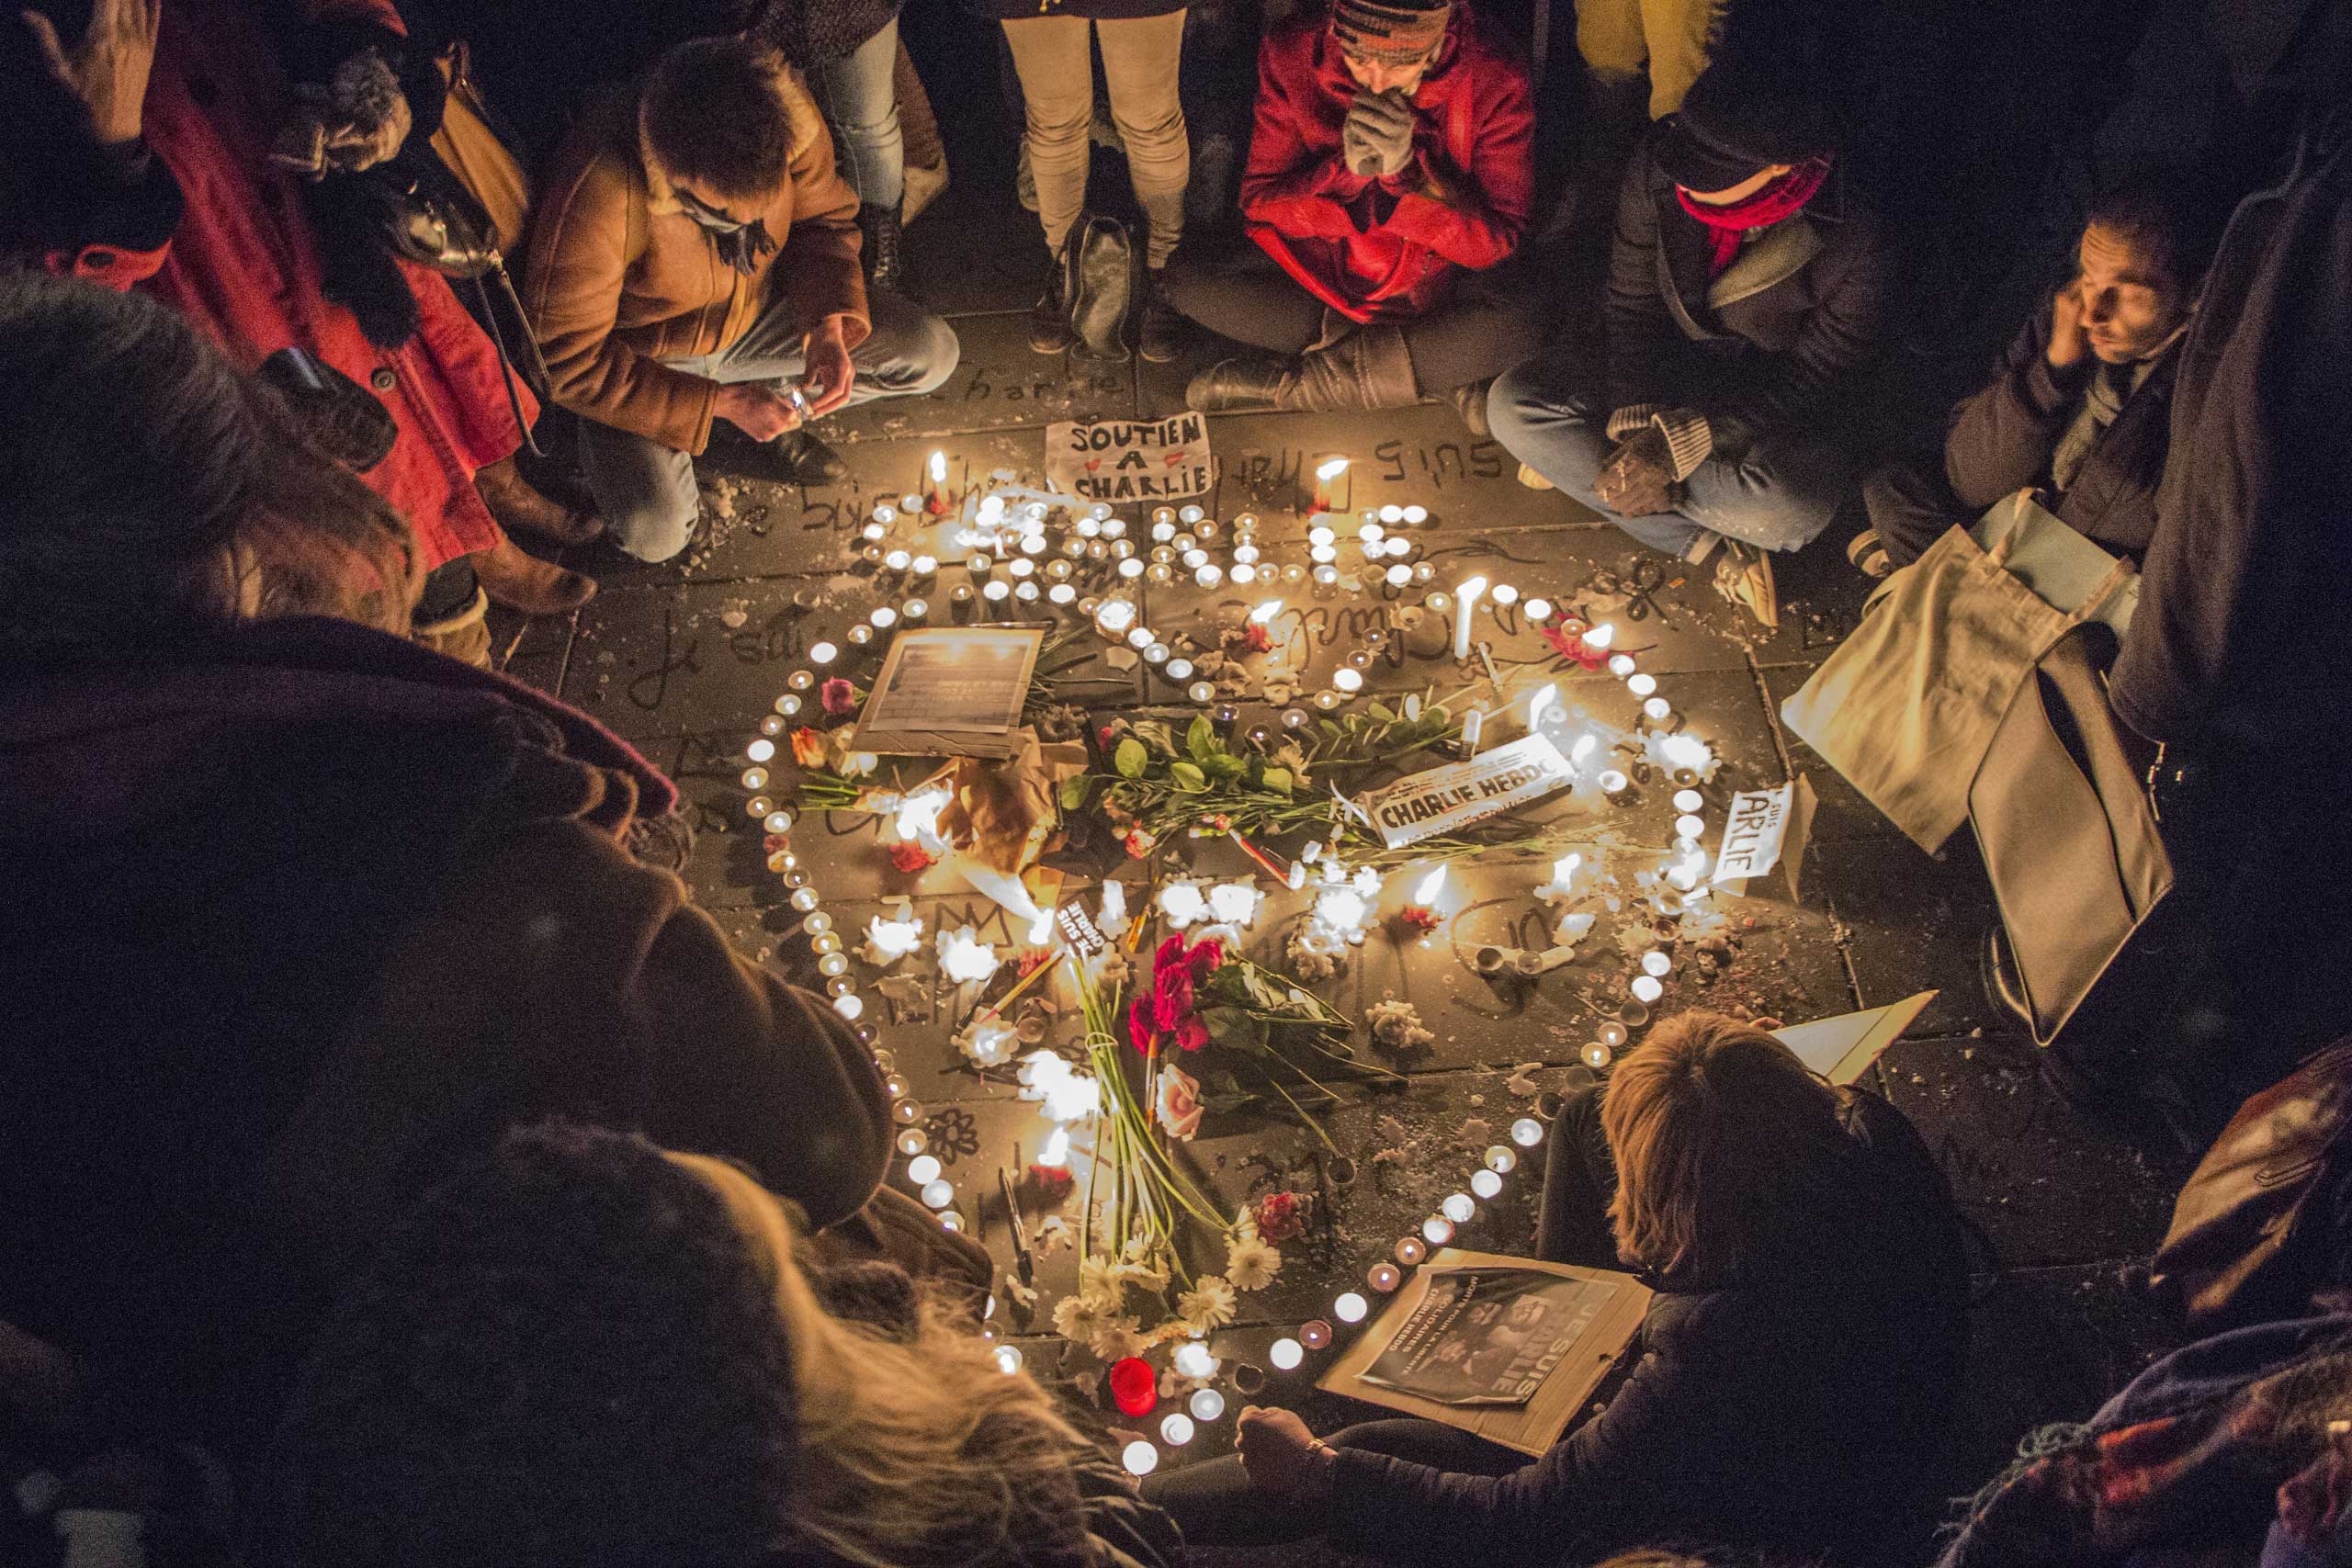 A tribute of flowers and candles in the shape of a heart is set up at Place de la Republique in Paris in memory of the victims of the Charlie Hebdo terrorist attack, on Jan. 7, 2015 in Paris. (David Chour—Demotix/Corbis)